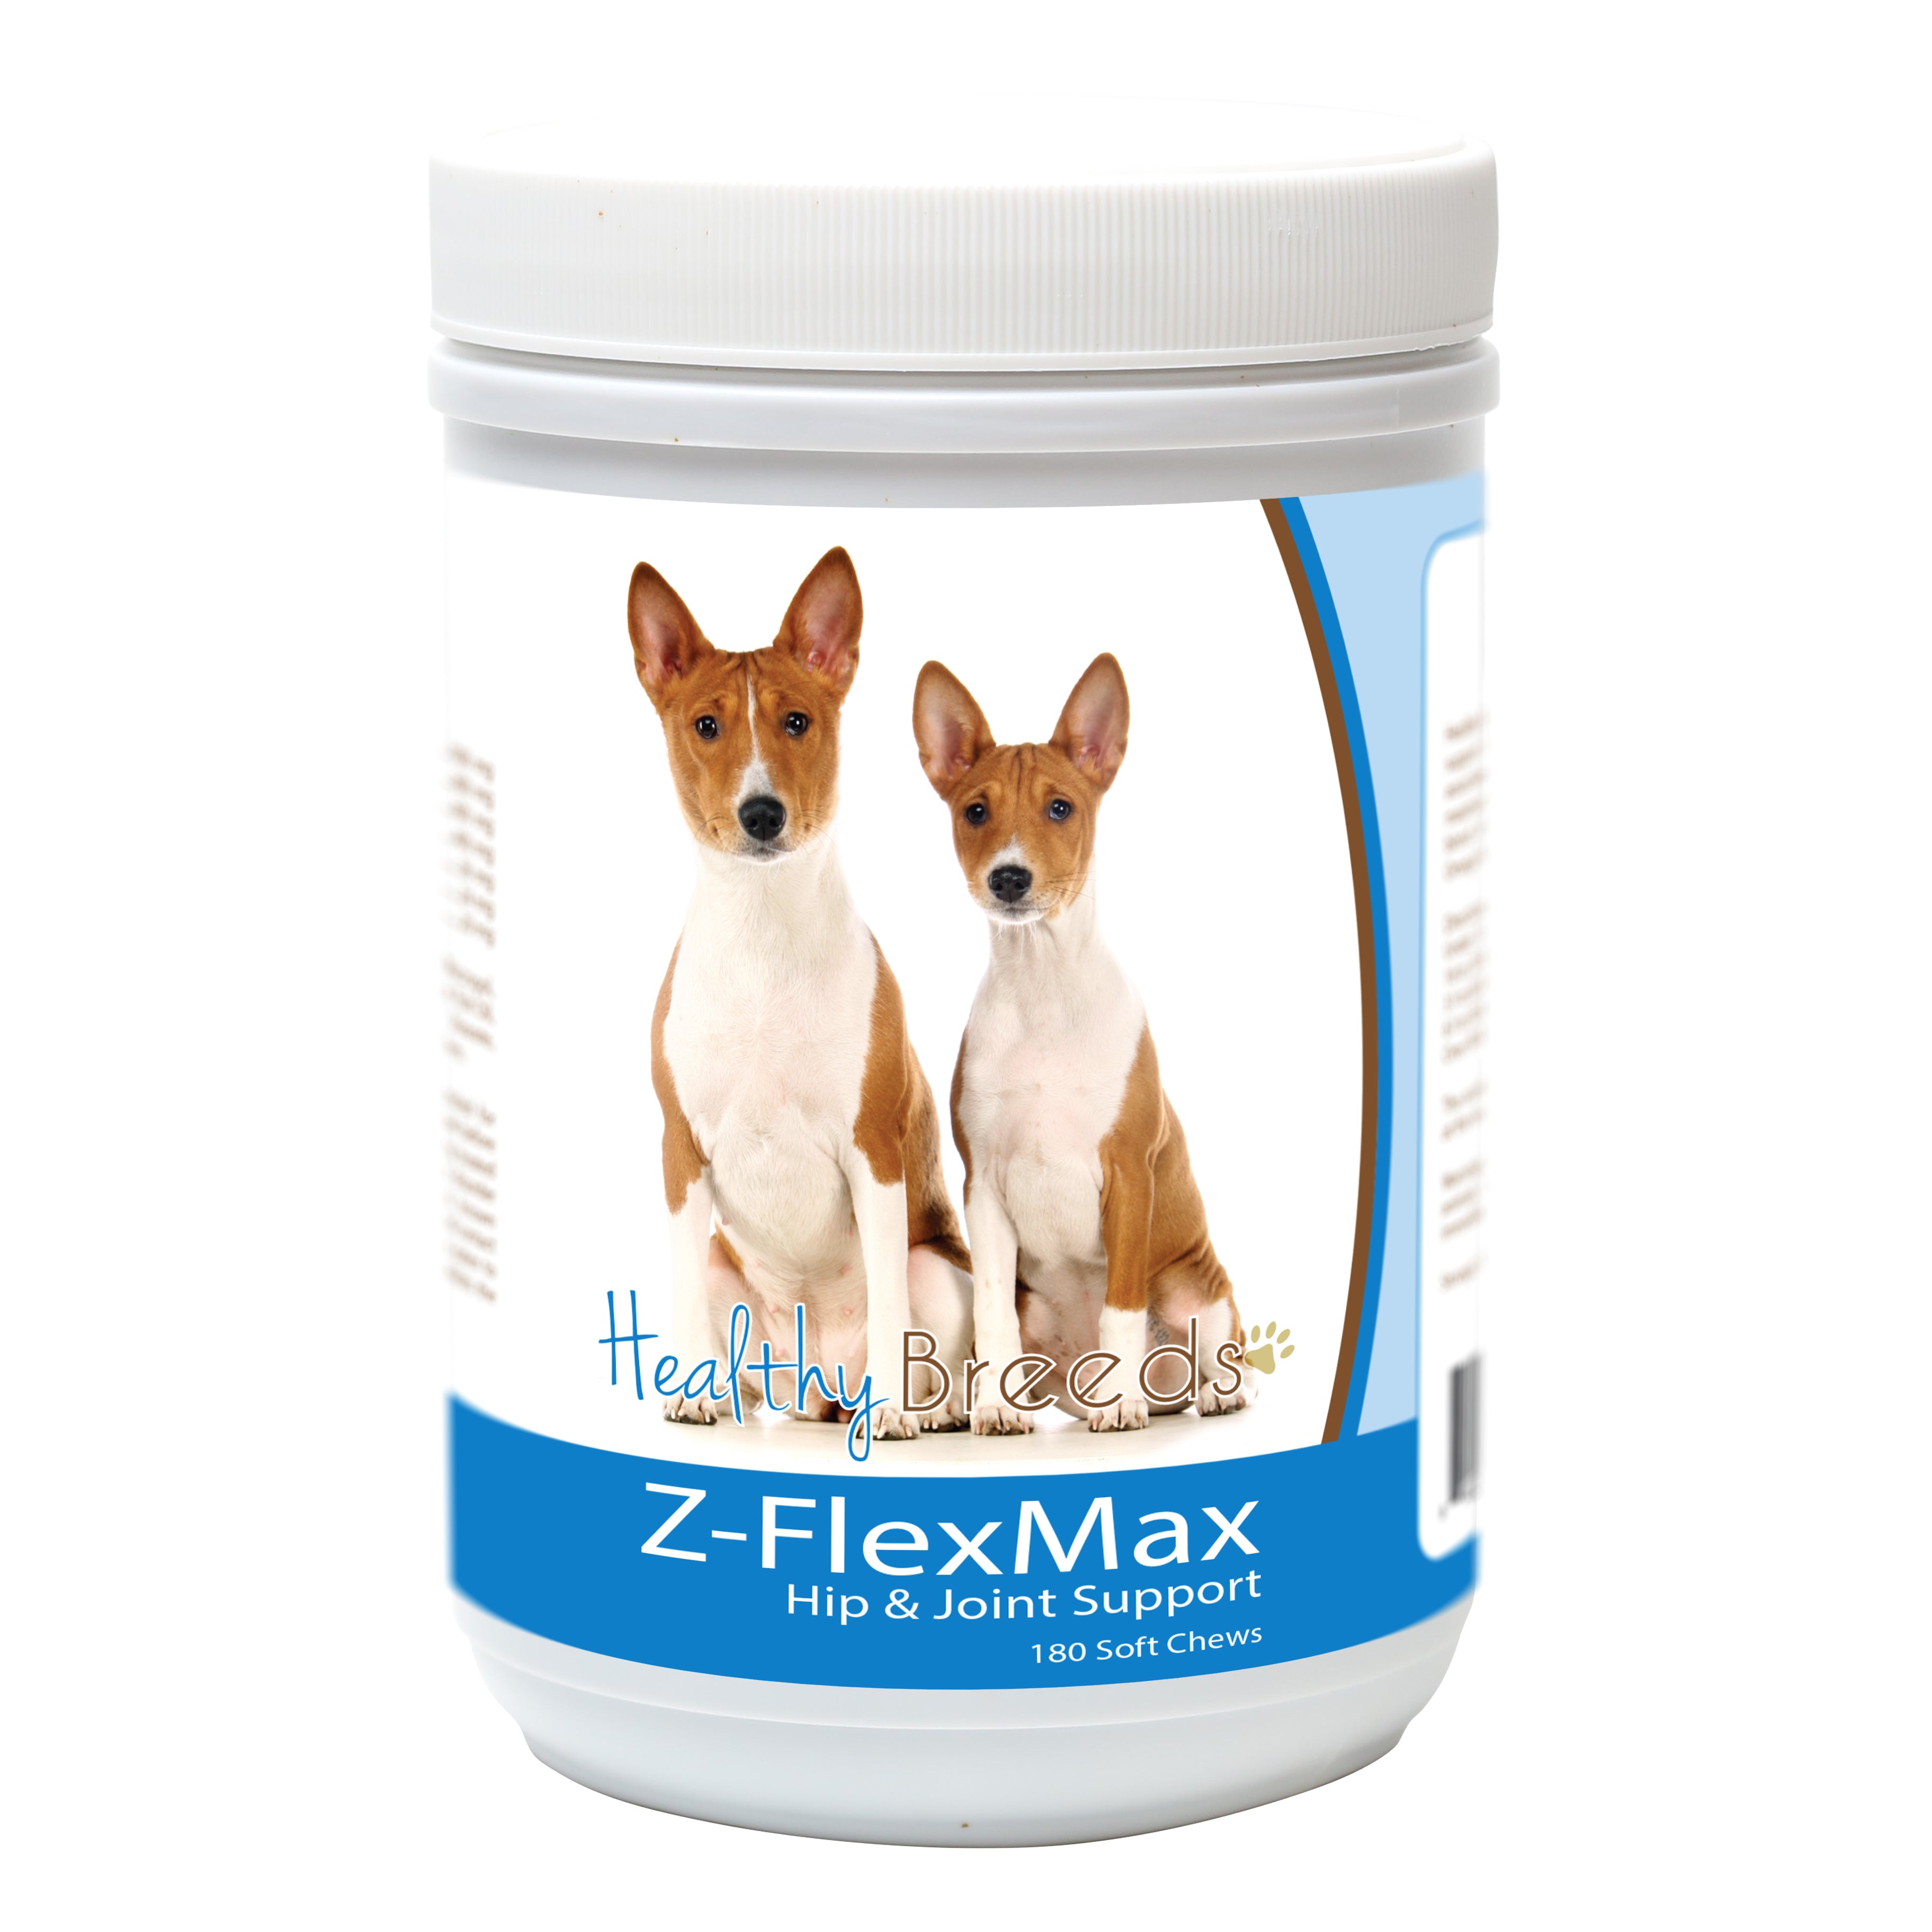 Basenji Z-Flex Max Dog Hip and Joint Support 180 Count